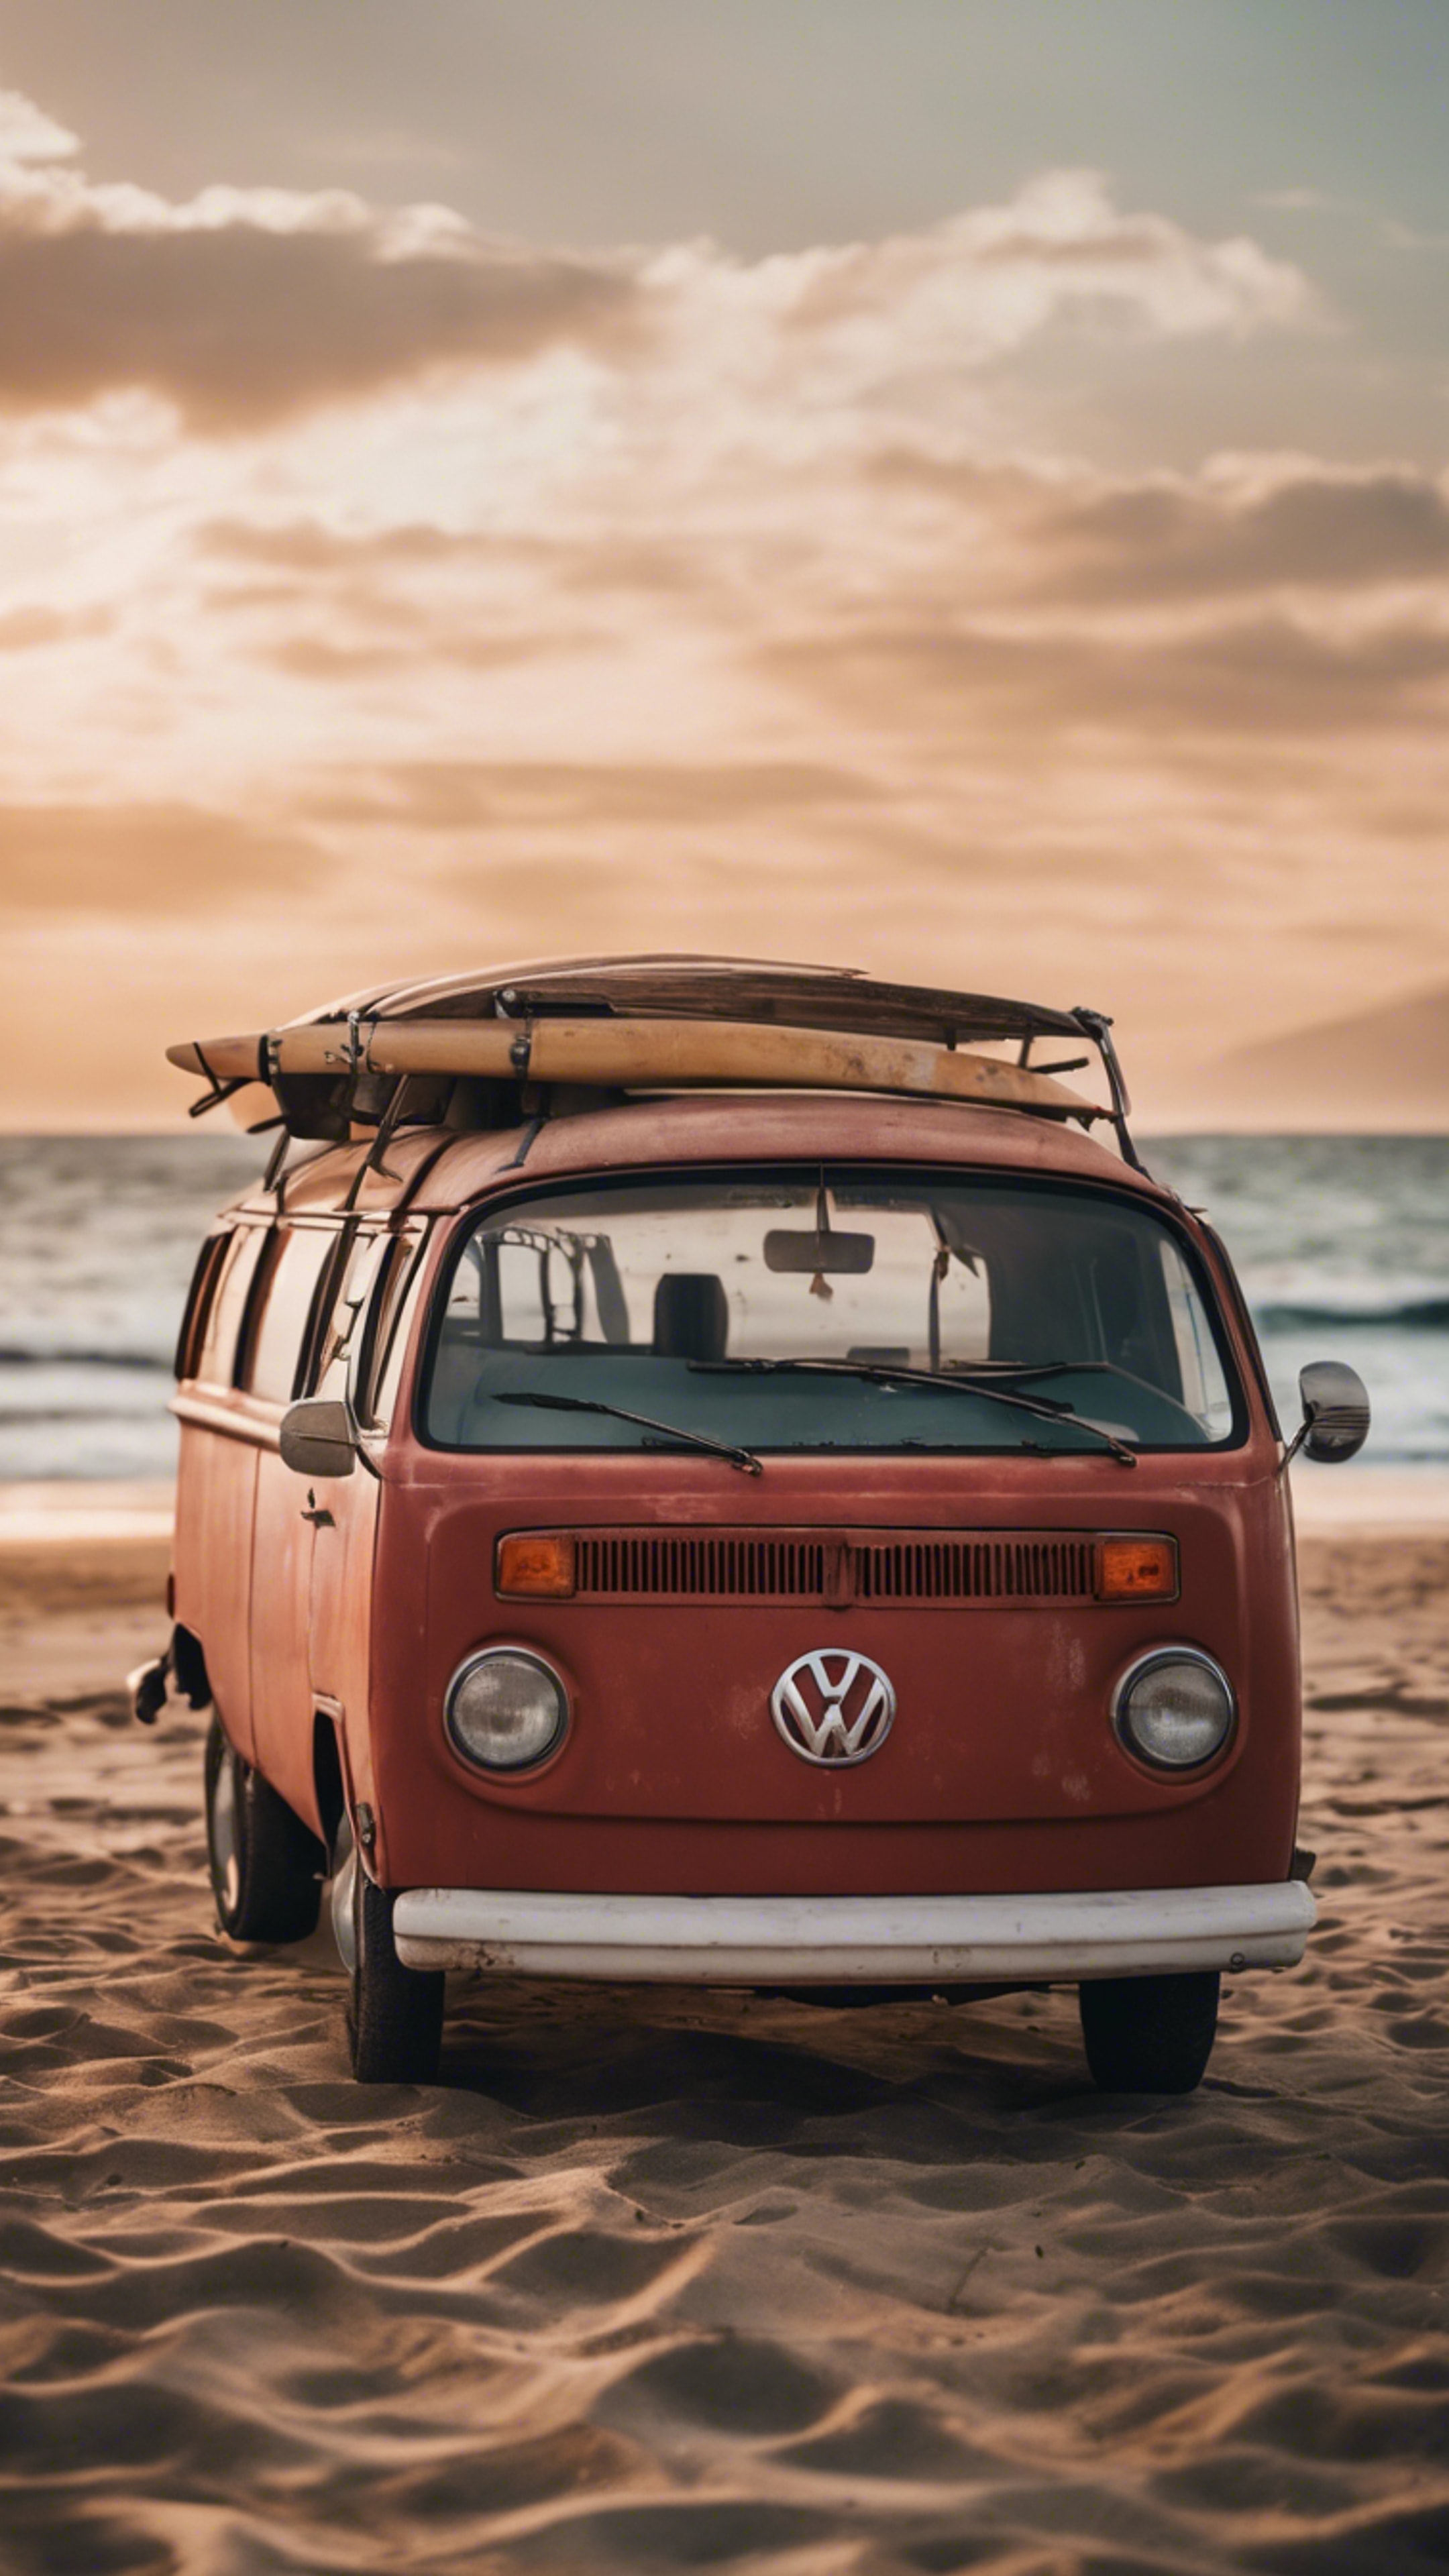 An old, rusted red Volkswagen van parked at a beach with the sunset in the backdrop, surfboards leaning against it. Tapeta na zeď[f96813b3e584499cadbf]